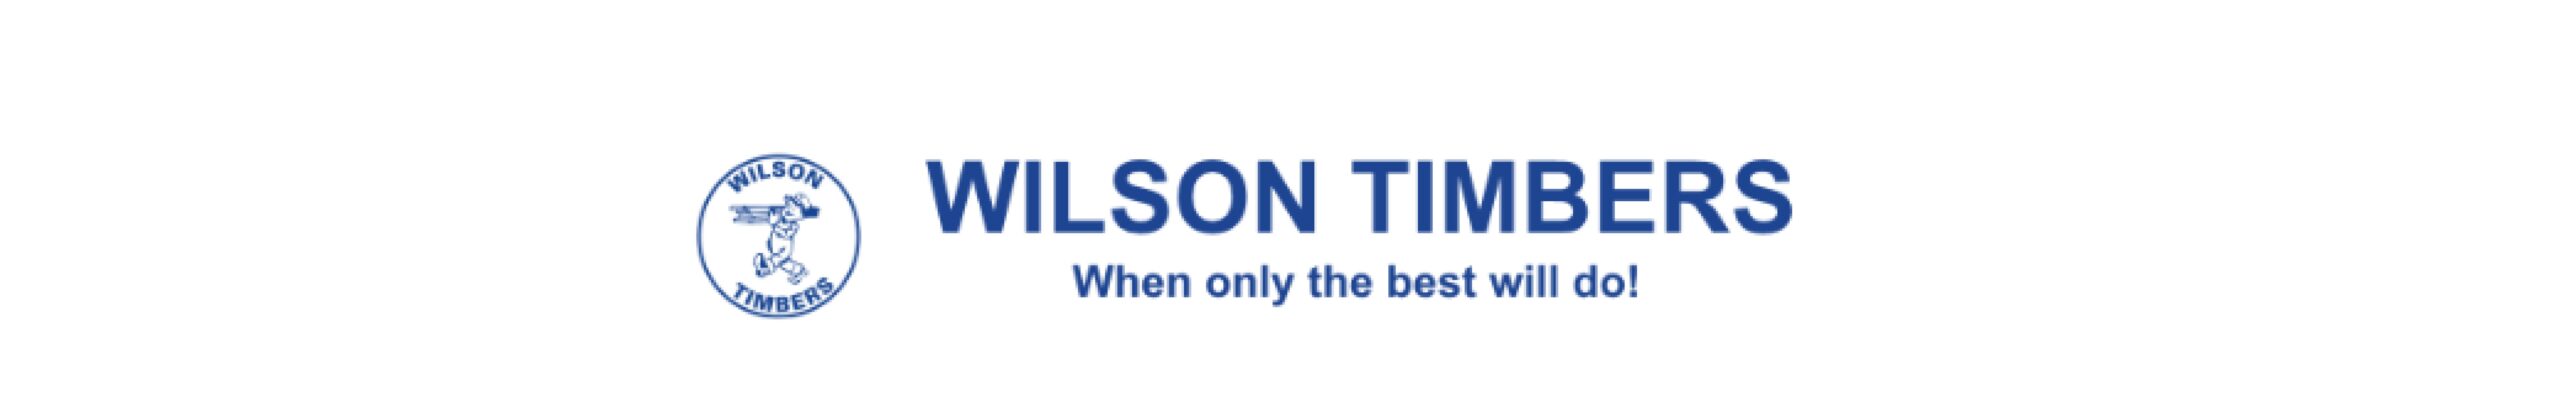 Where to buy Wilson Timber suppliers logo